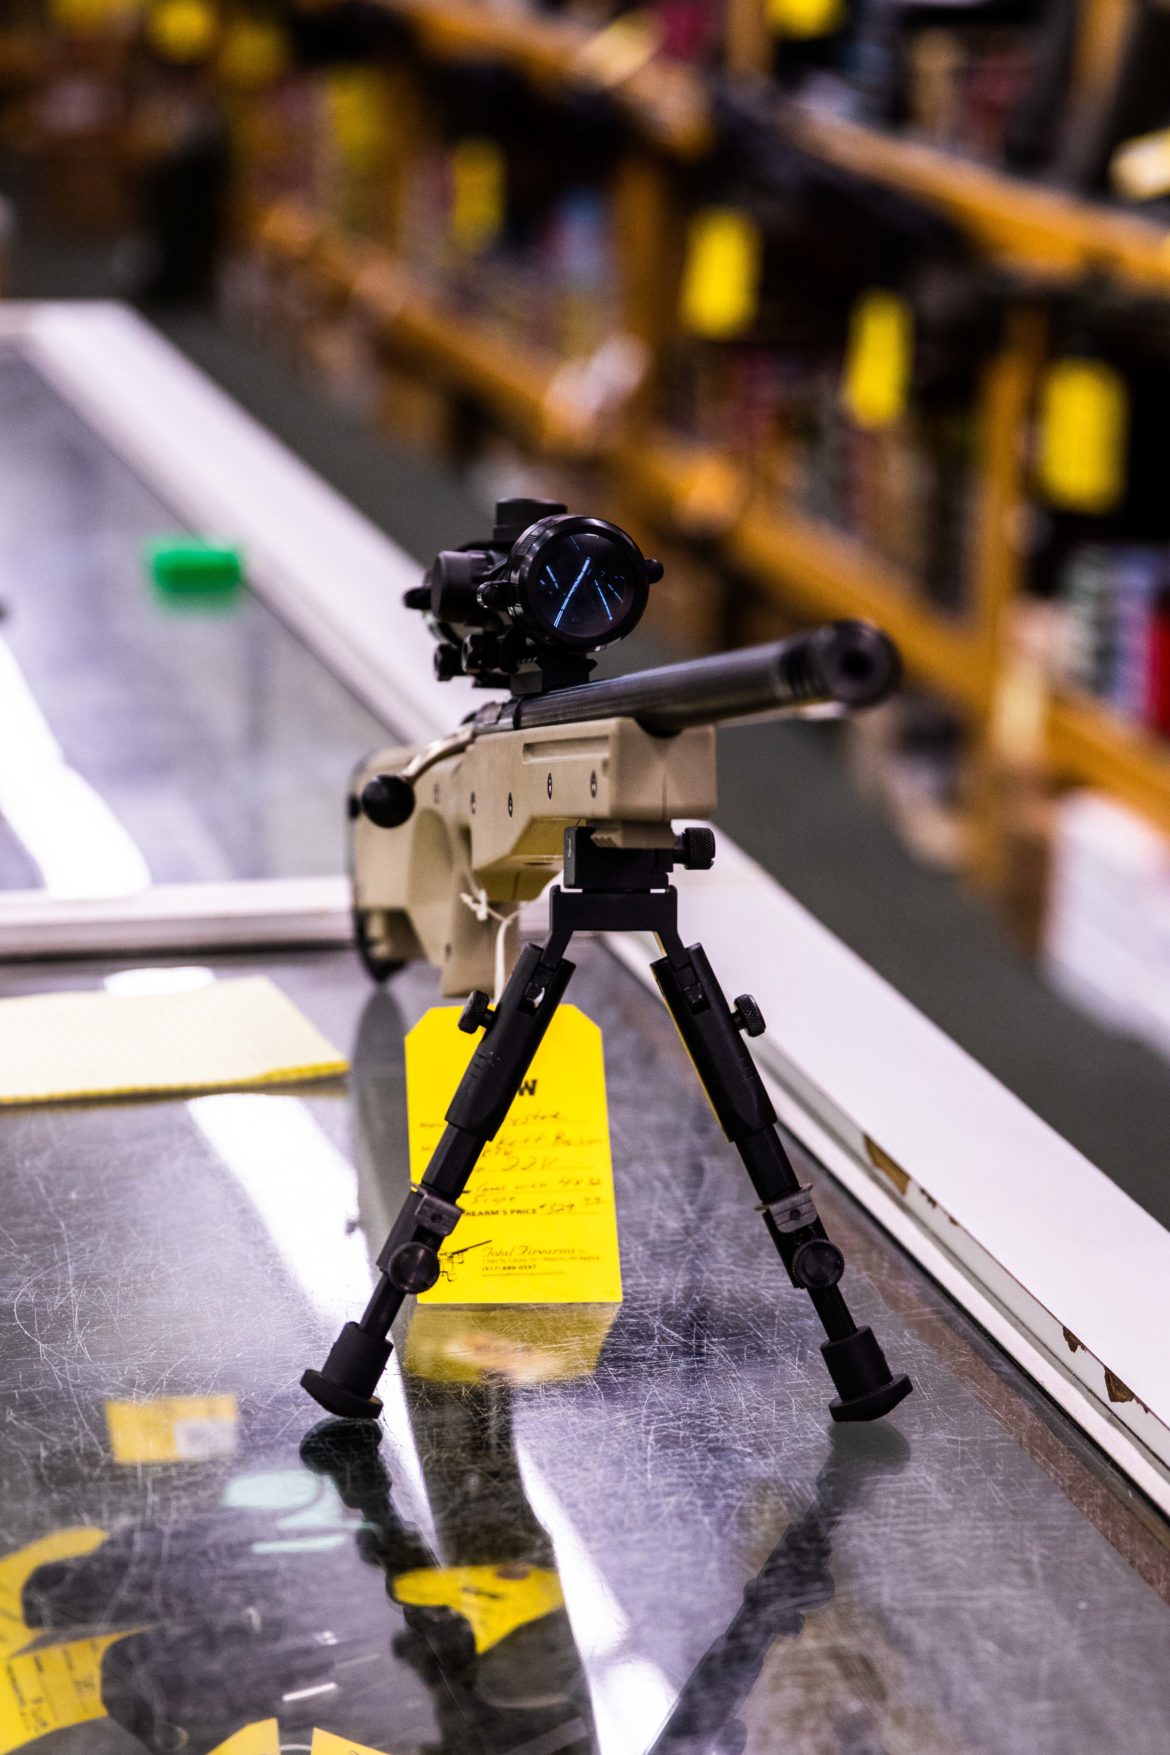 A scoped rifle sits out on the counter at Total Firearms in Delhi Township on Sept. 24. Total Firearms has a section for both a gun range and a gun shop.